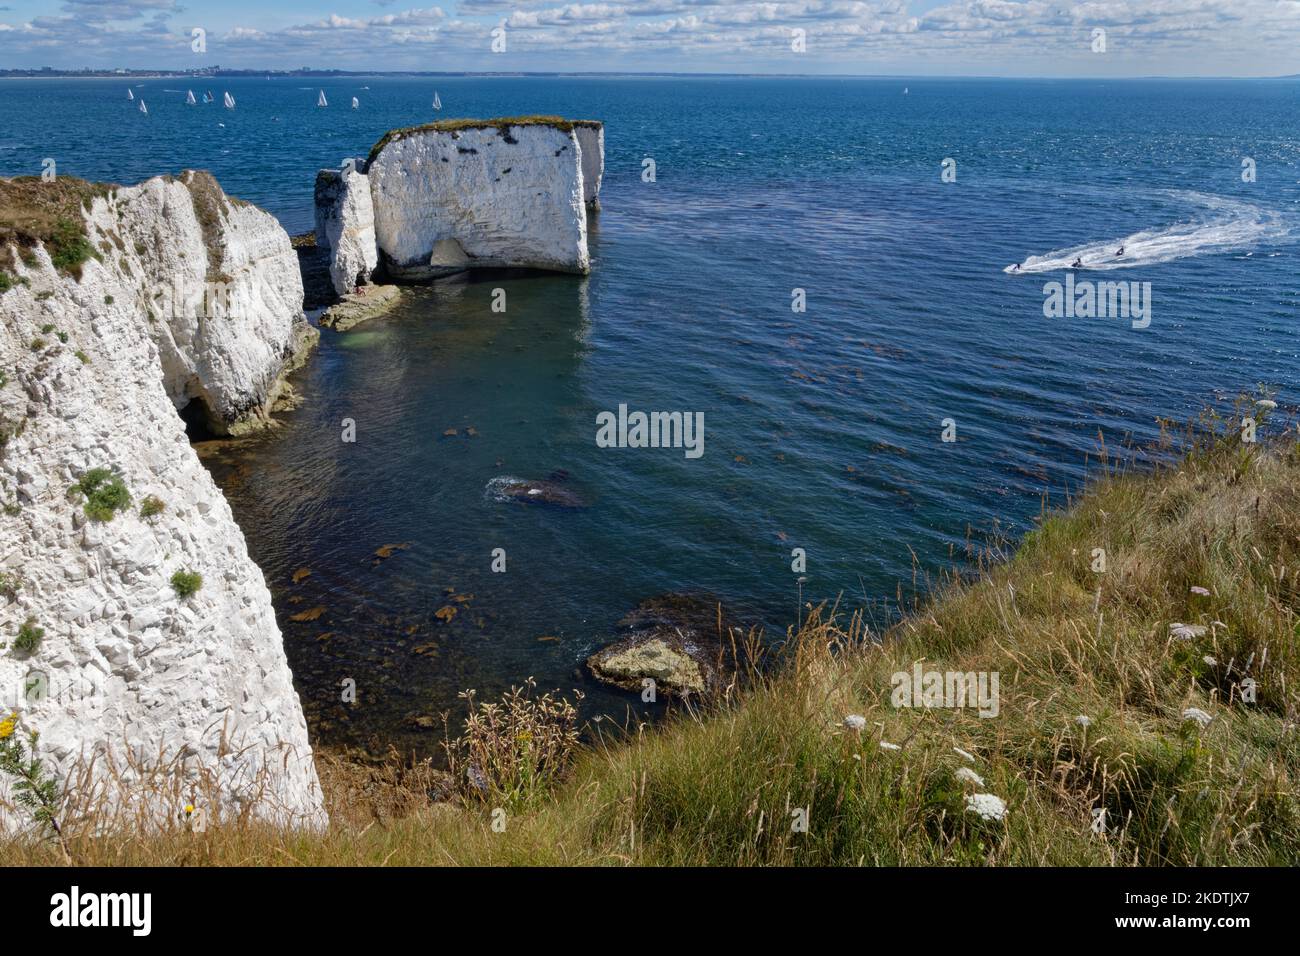 Old Harry’s Rocks with a group of people on jet skis approaching and a sailing regatta in the background in Studland Bay, Studland, Dorset, UK, July. Stock Photo